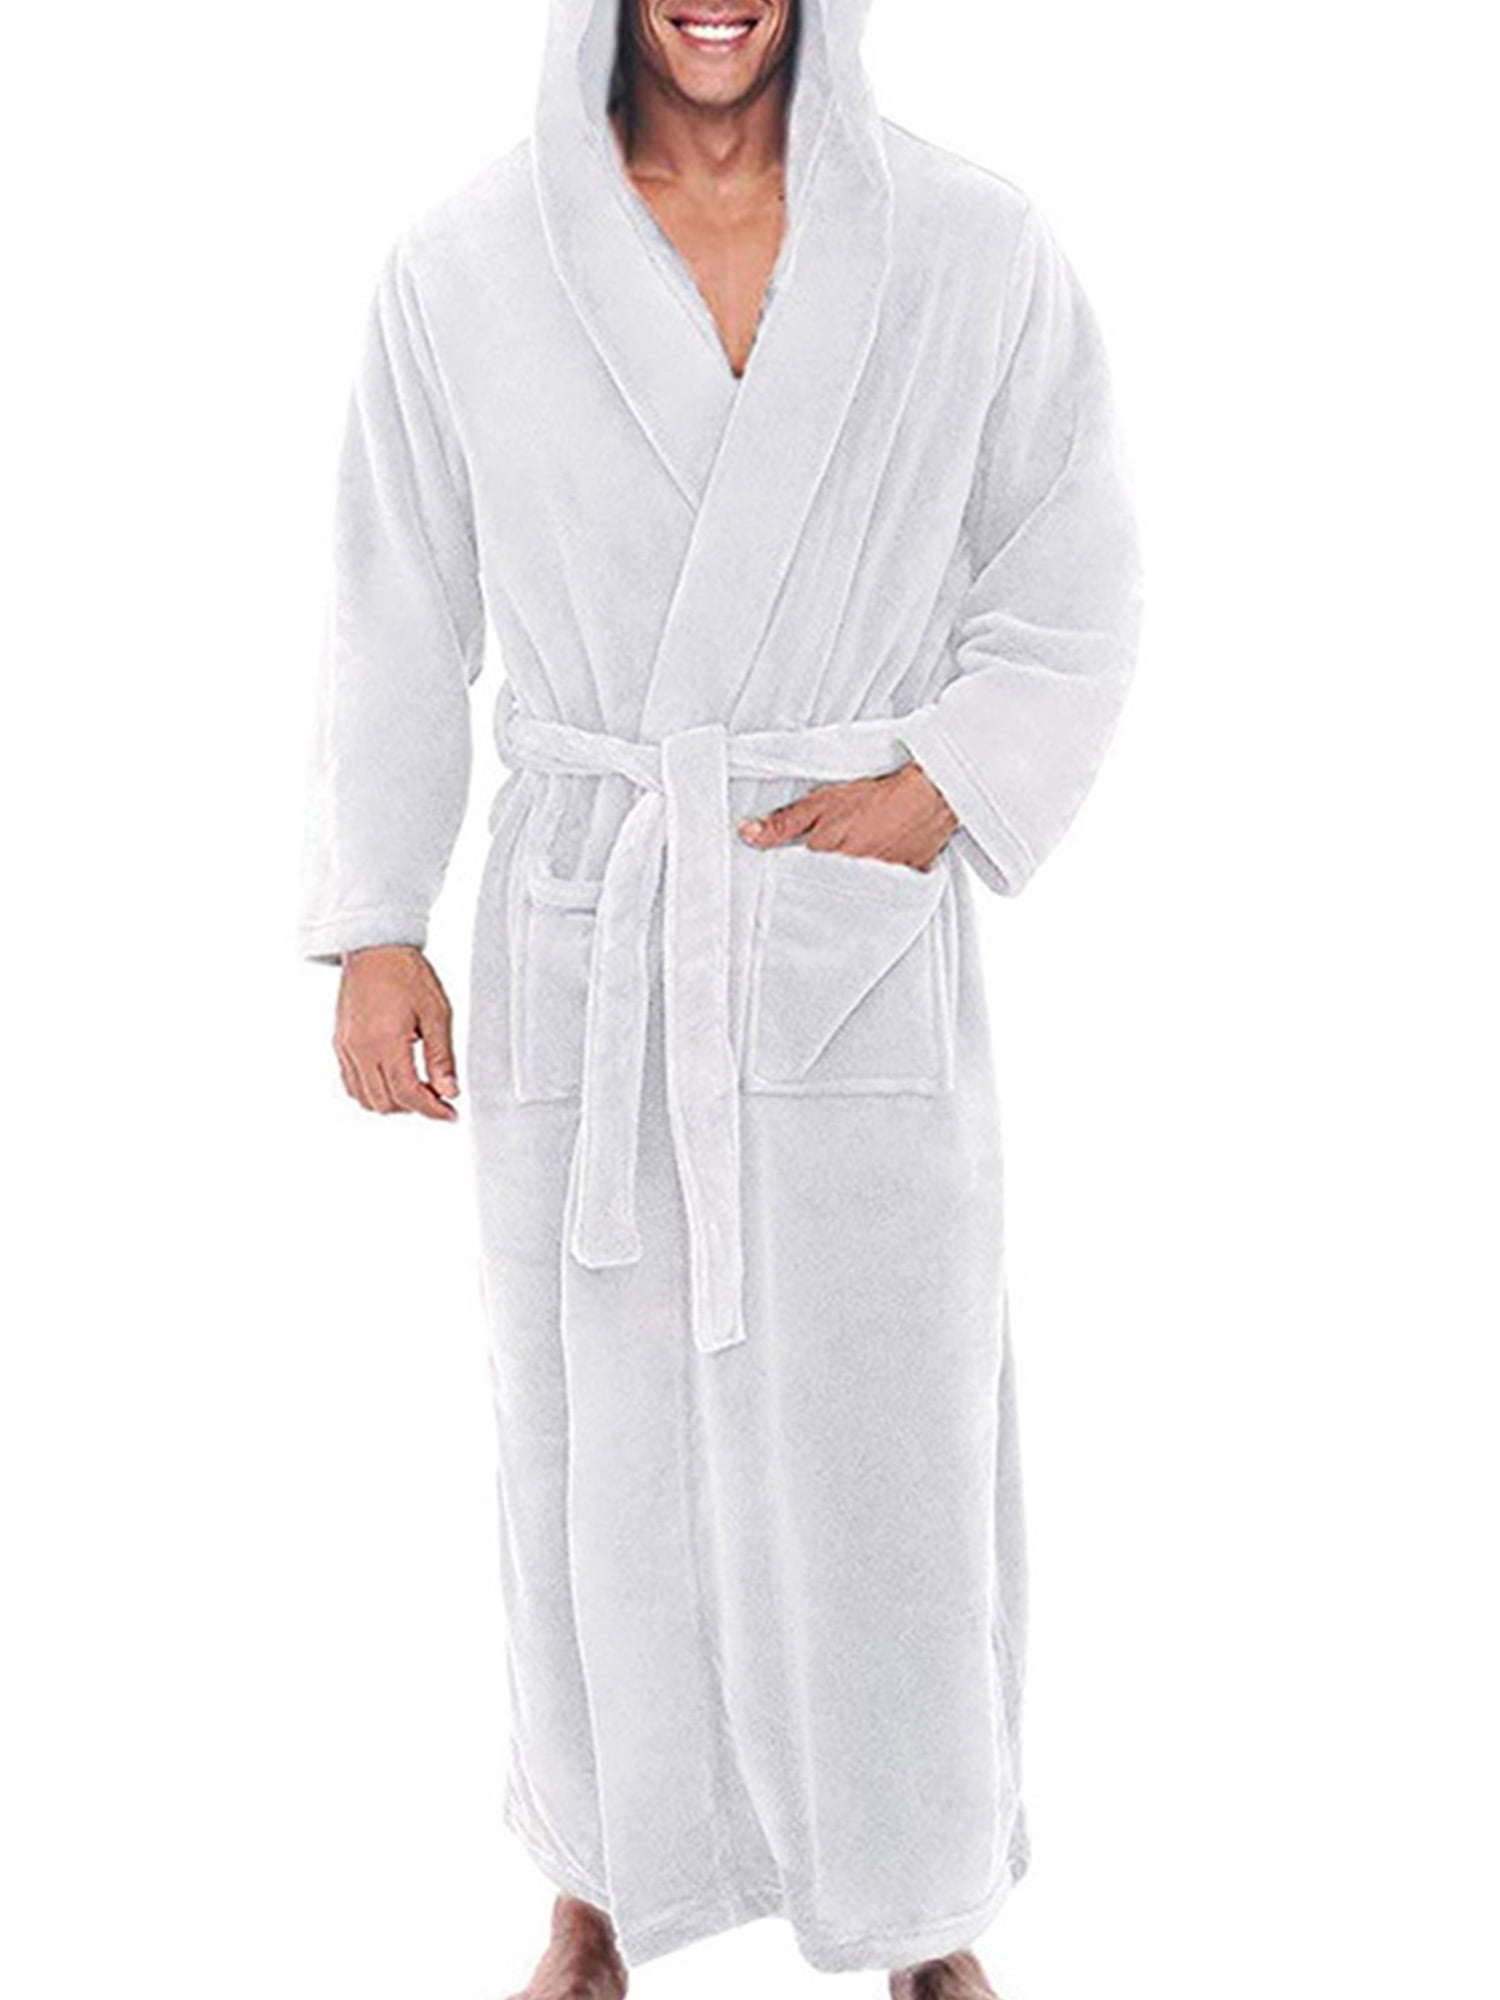 Voguele Mens Dressing Gown Hooded Wrap Robe Long Sleeve Bath Robes Lounge  Towelling Soft Nightwear White 3XL